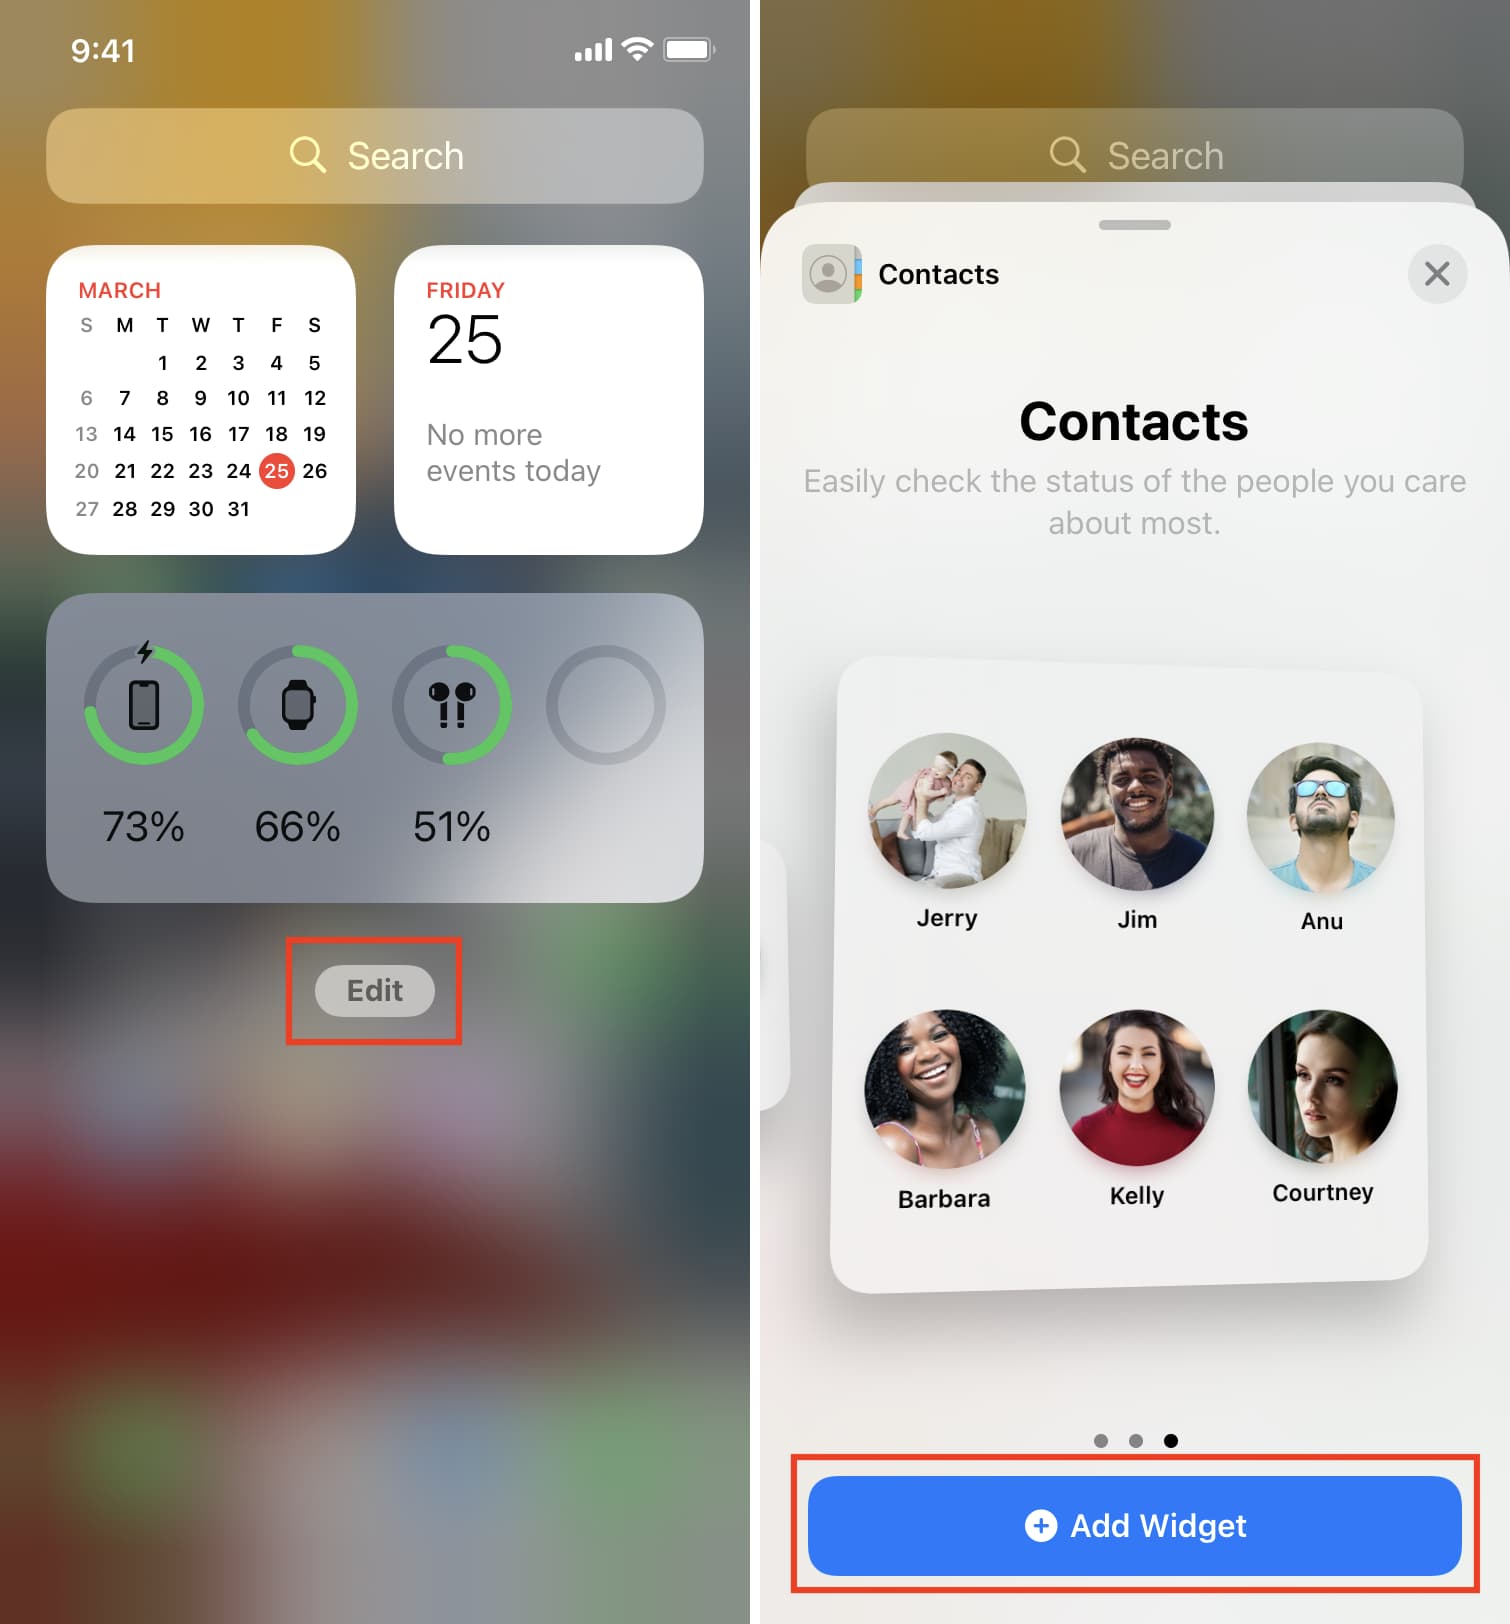 Add Contacts widget to speed dial on iPhone